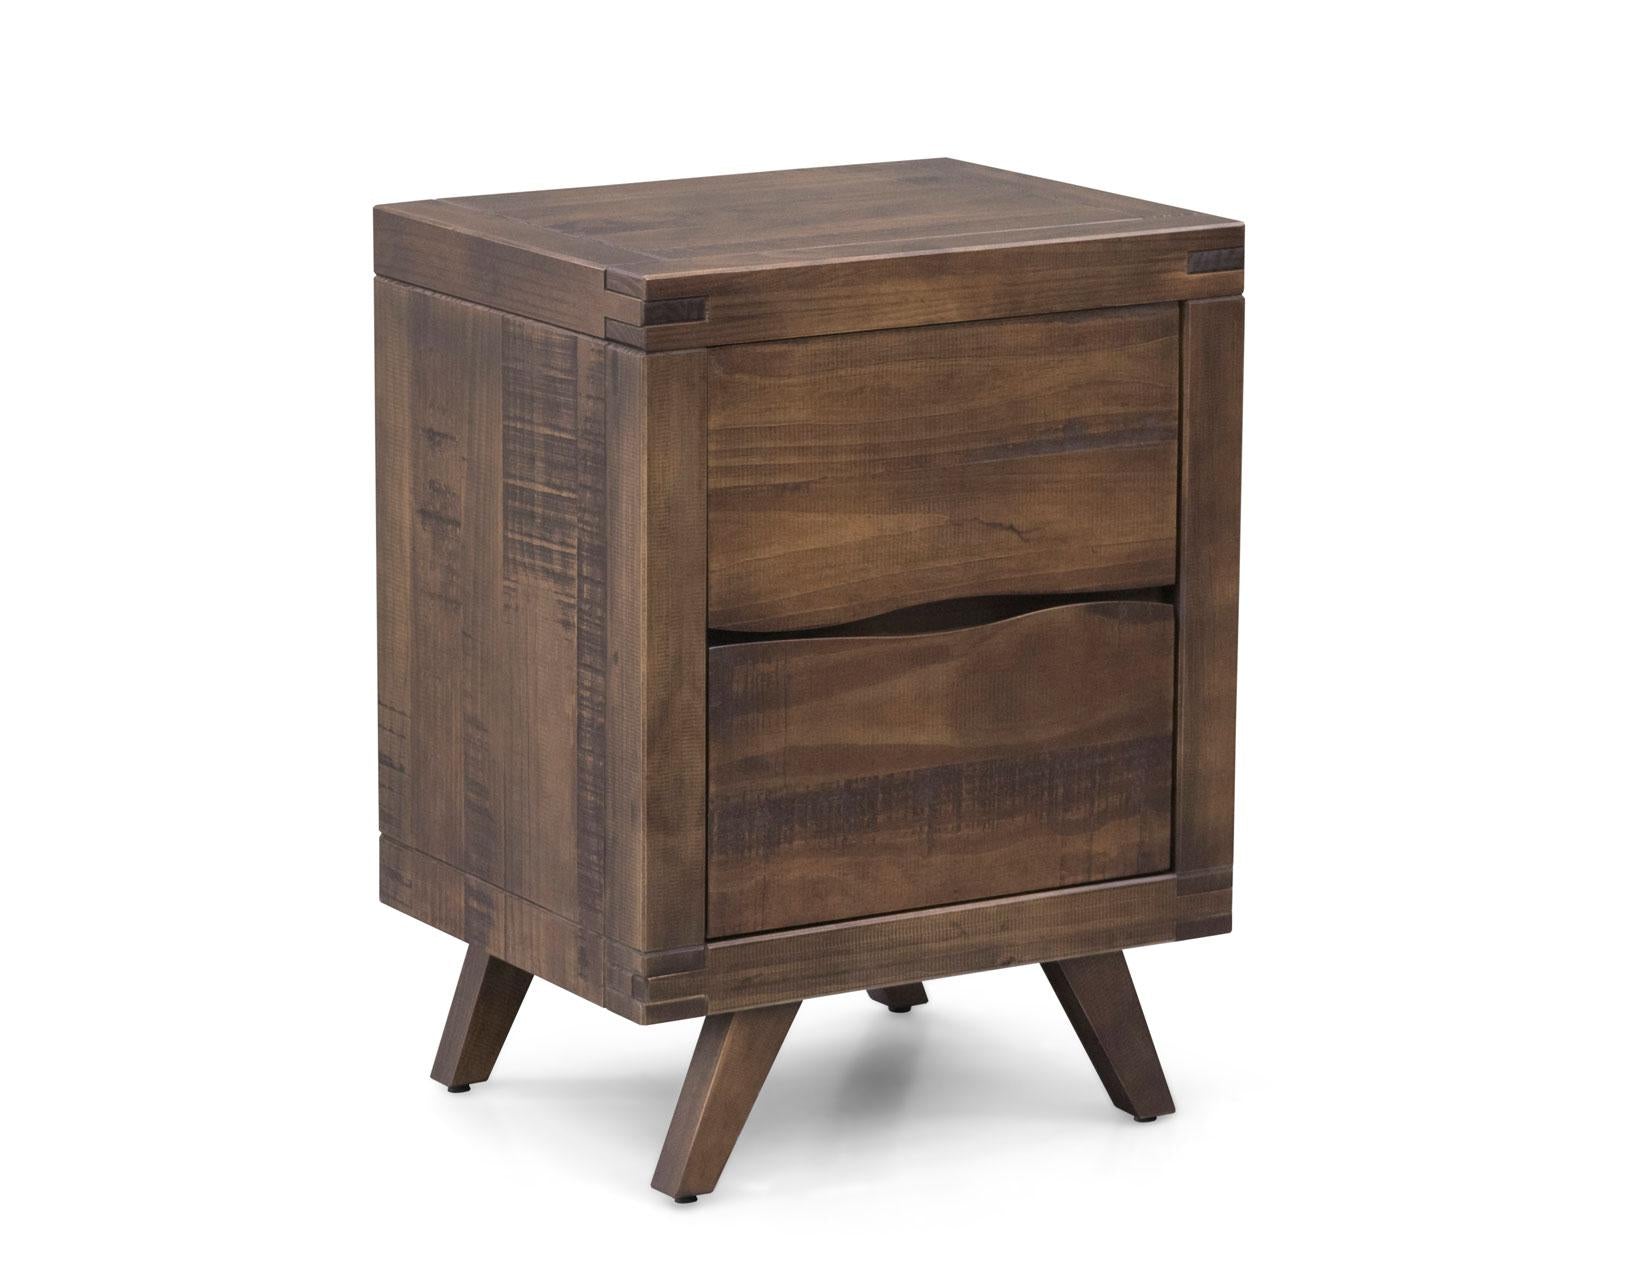 Steve Silver Pasco 2 Drawer Nightstand in Cocoa